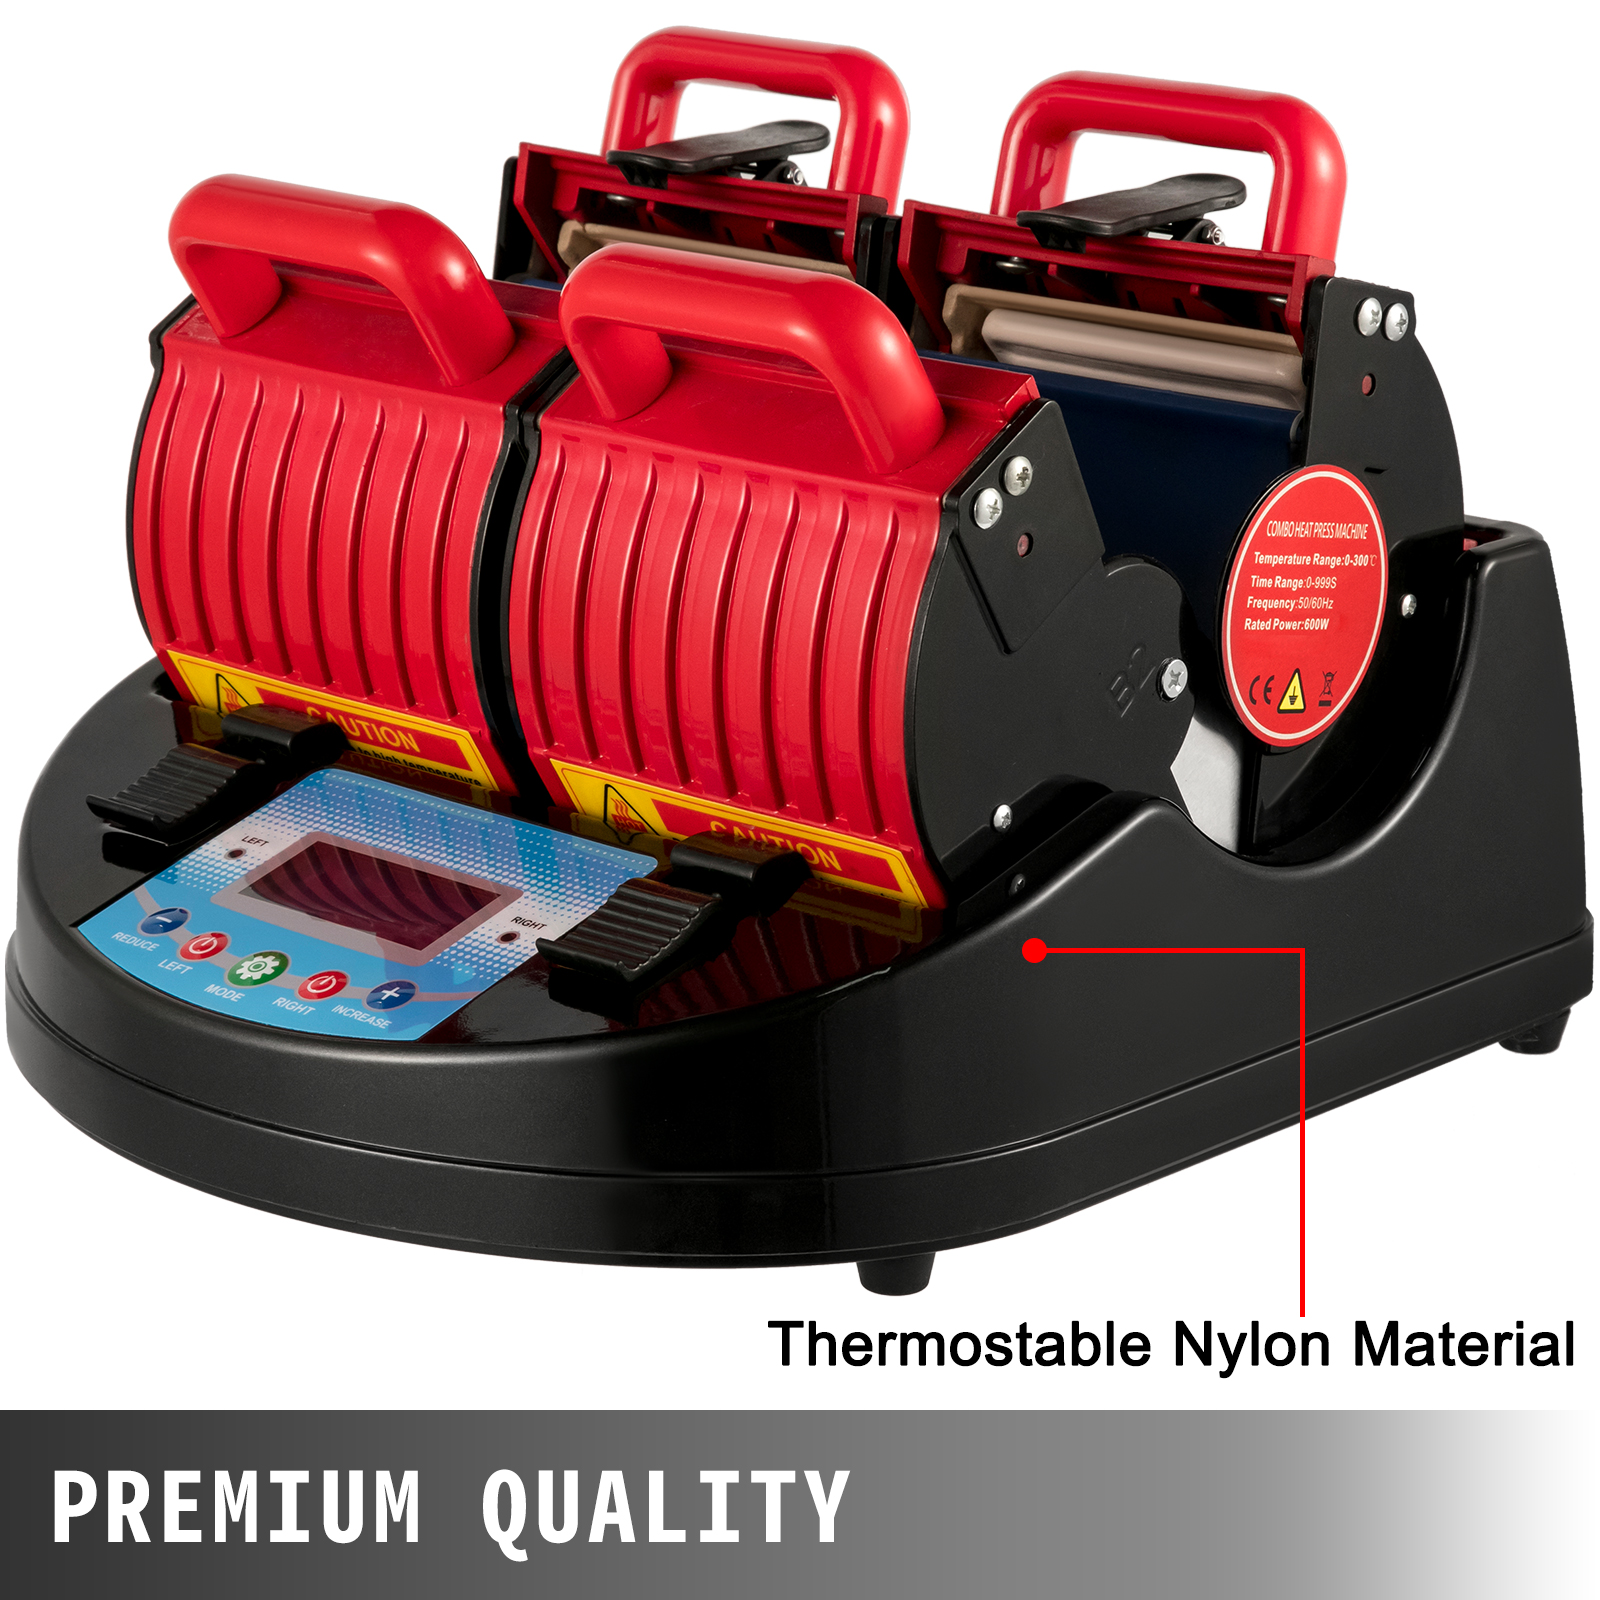 5 In 1 Heat Press 15 X 15 Digital Clamshell Sublimation for DIY